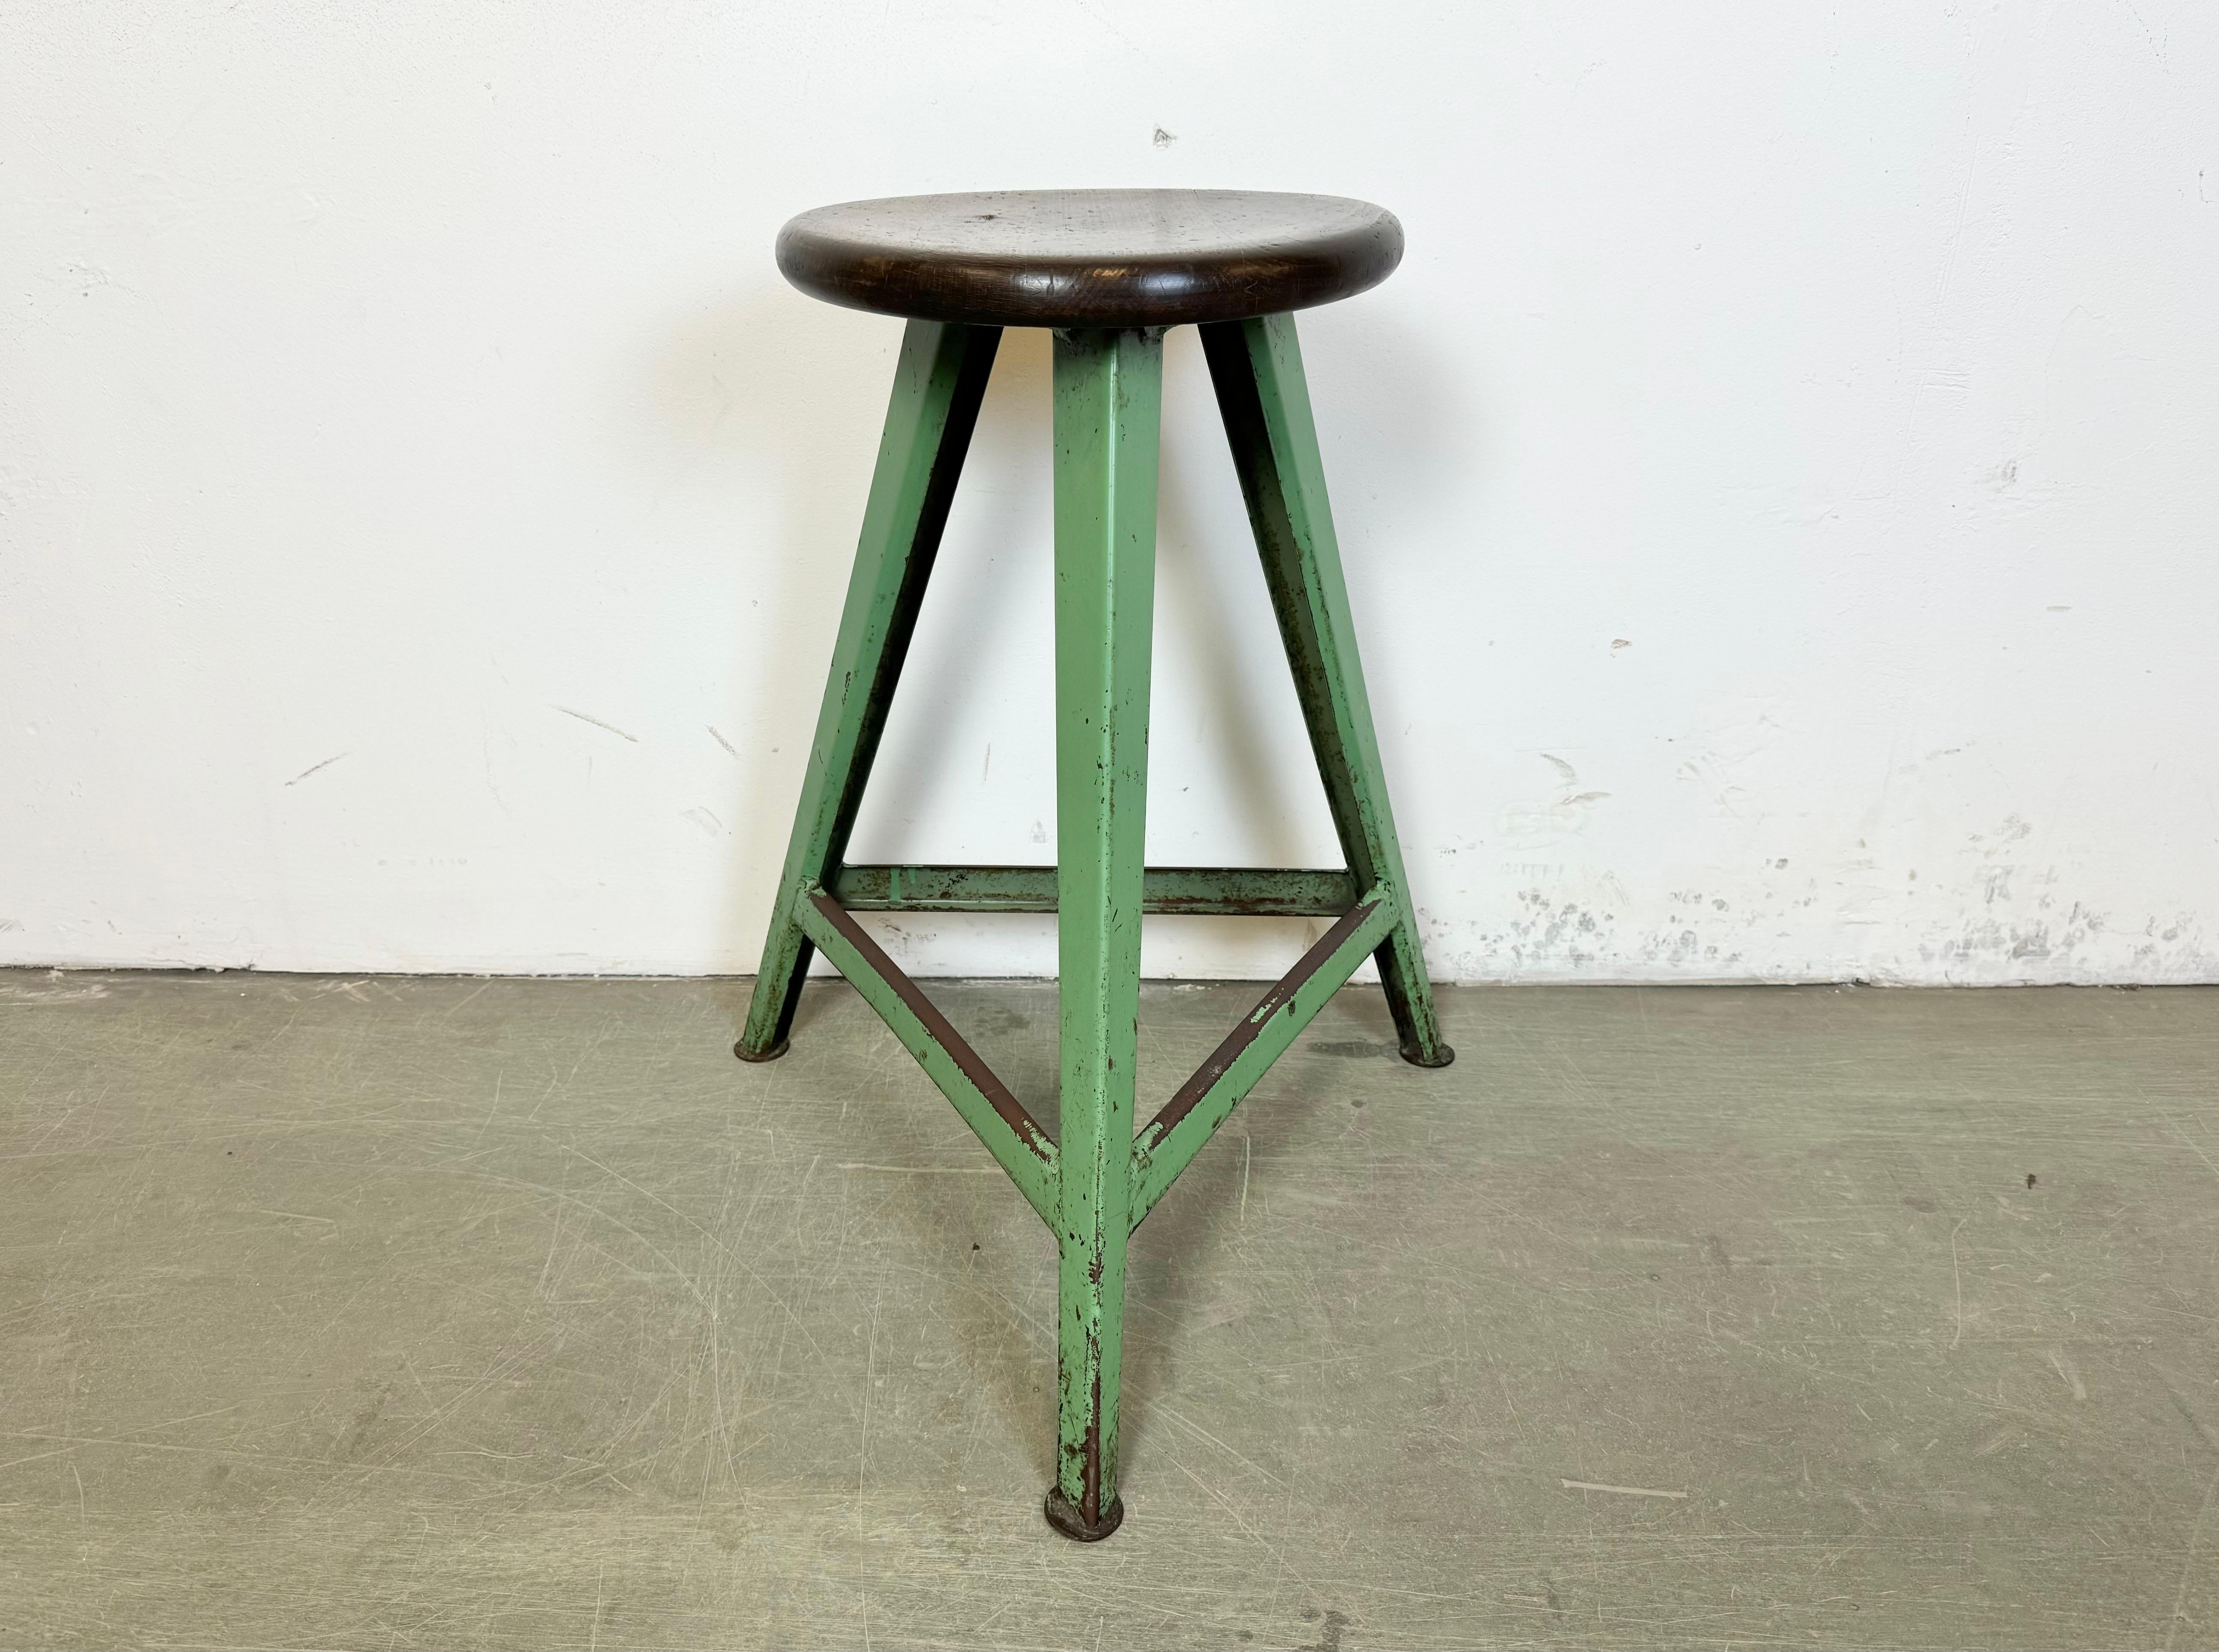 Vintage Industrial factory stool made in former Czechoslovakia during the 1960s It features a wooden seat and a green metal frame. The weight of the stool is 4,7 kg.
The diameter of the seat is 32 cm.